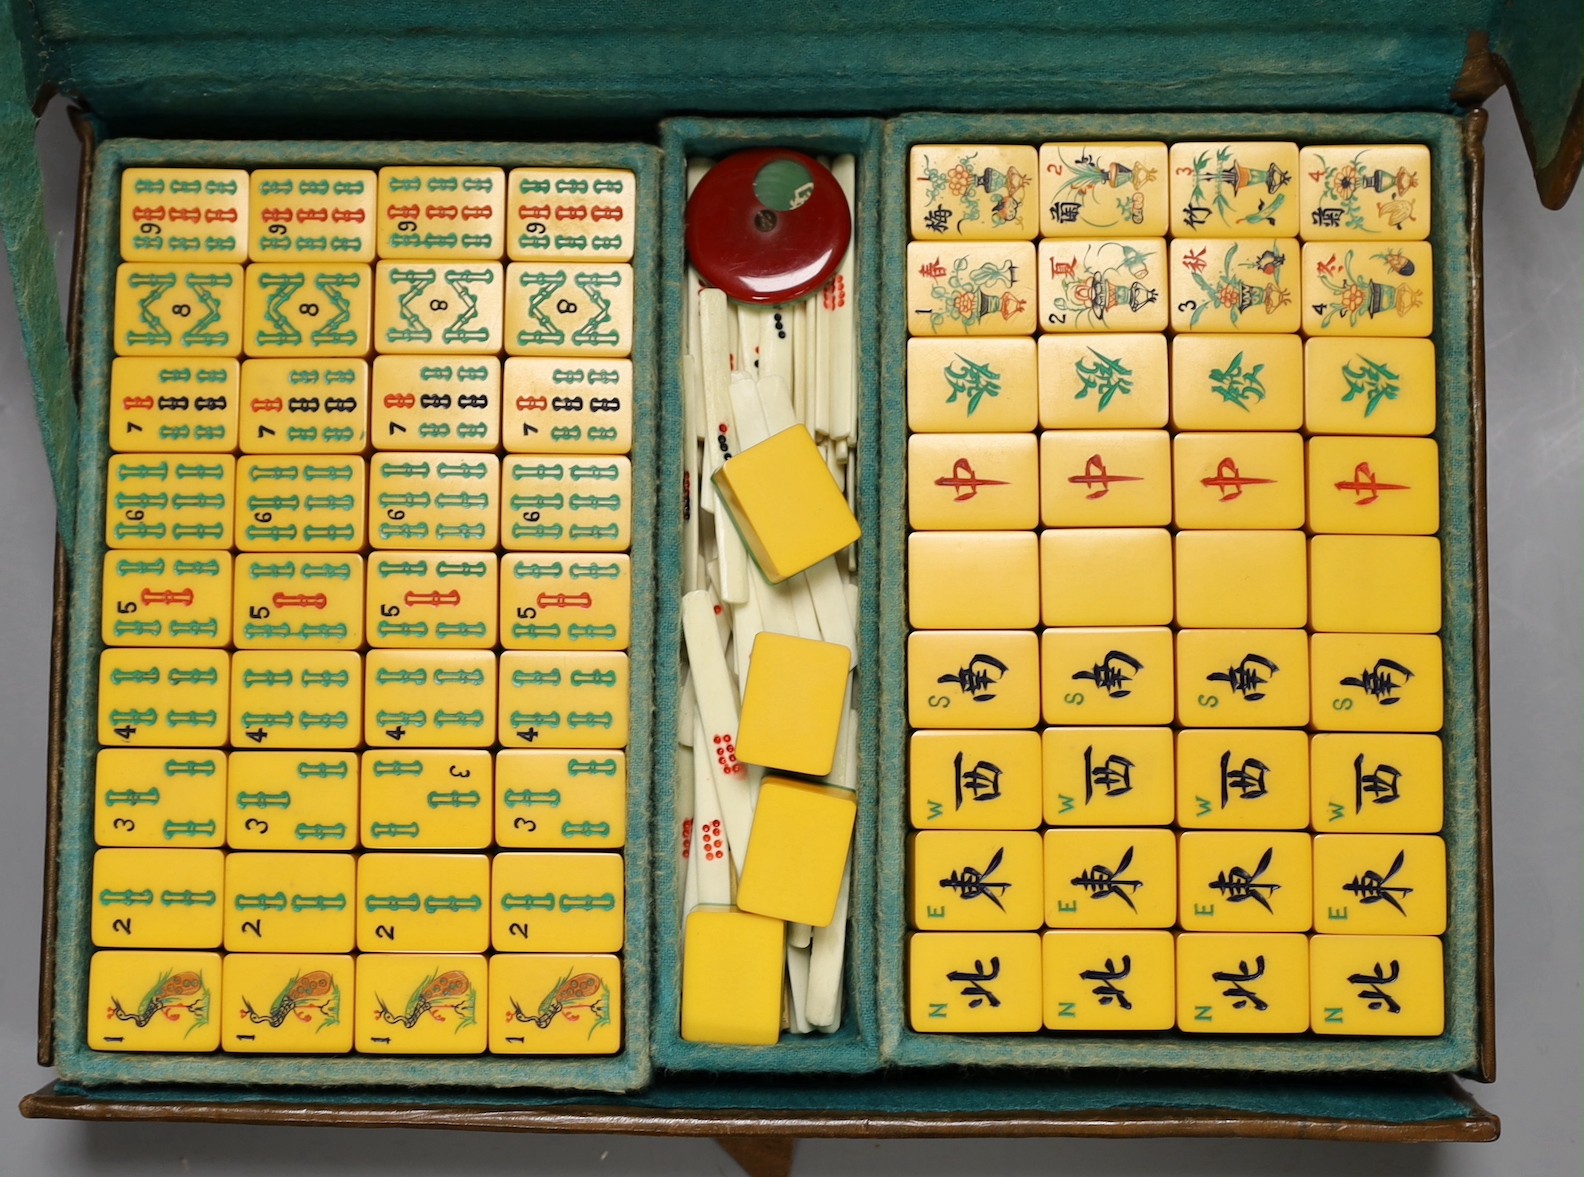 A 1920's leather travelling mahjong set